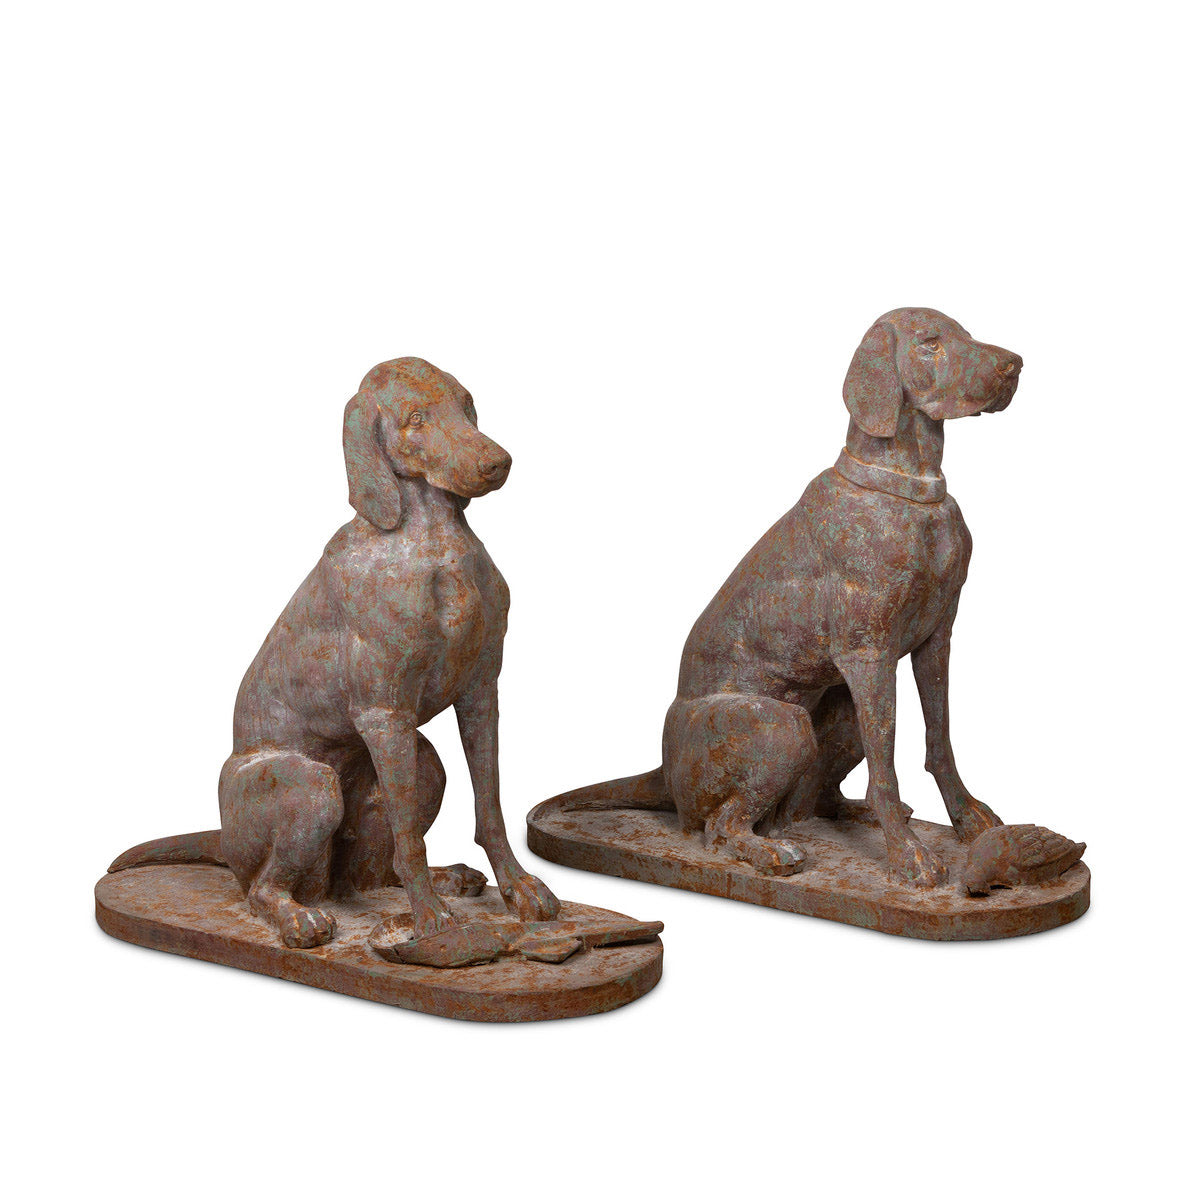 Set of 2 Cast Iron Life Size Hound Dogs - Backordered